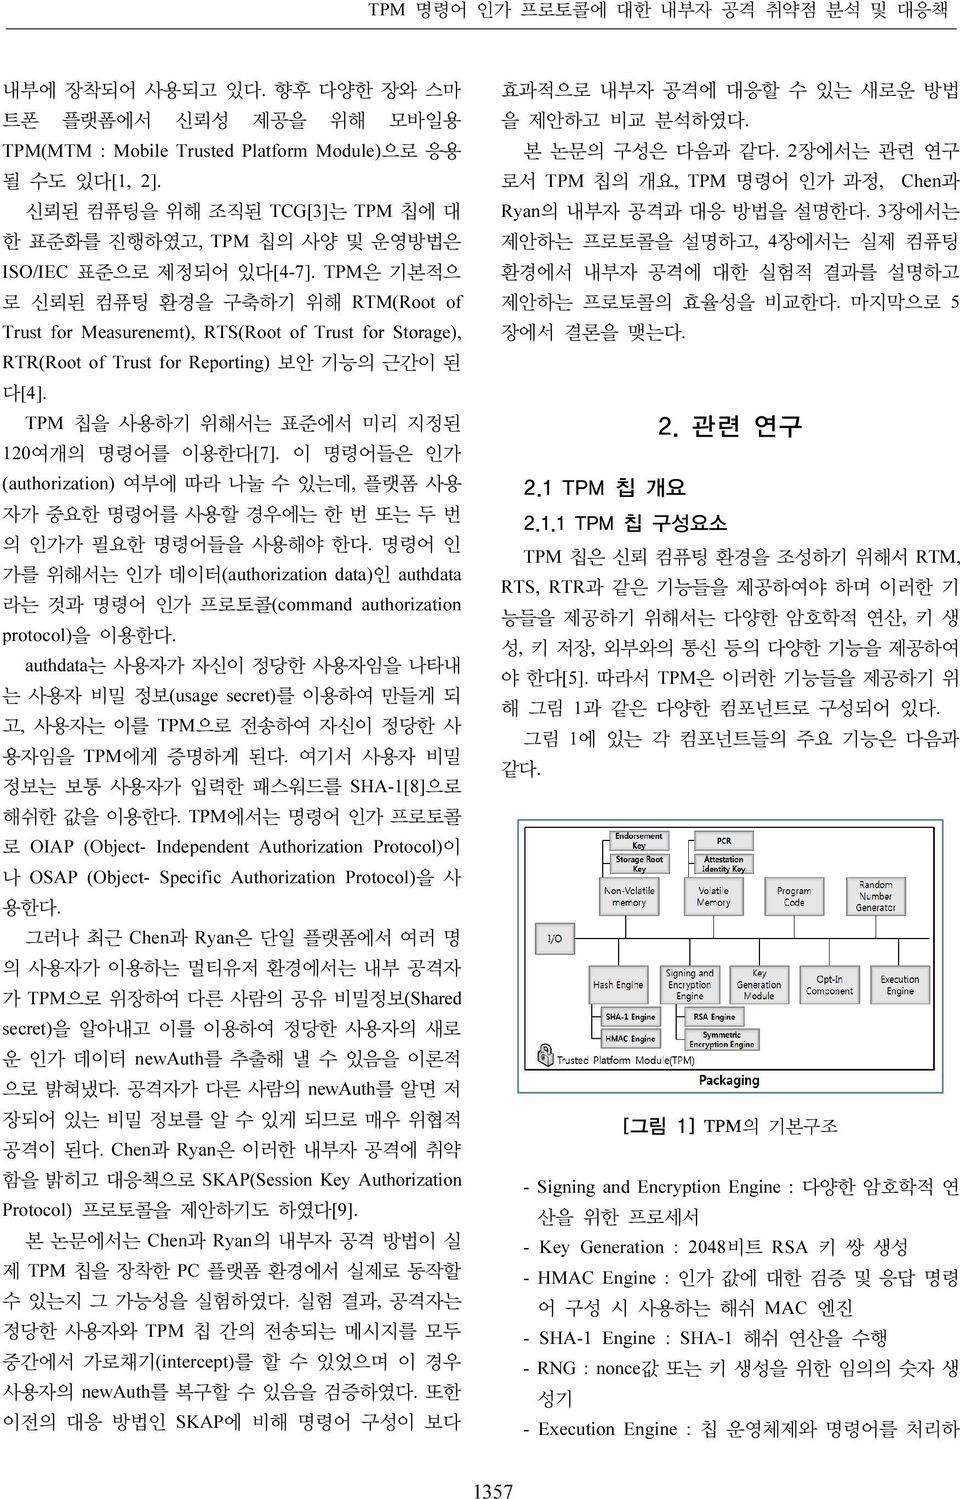 TPM은 기본적으 로 신뢰된 컴퓨팅 환경을 구축하기 위해 RTM(Root of Trust for Measurenemt), RTS(Root of Trust for Storage), RTR(Root of Trust for Reporting) 보안 기능의 근간이 된 다[4].